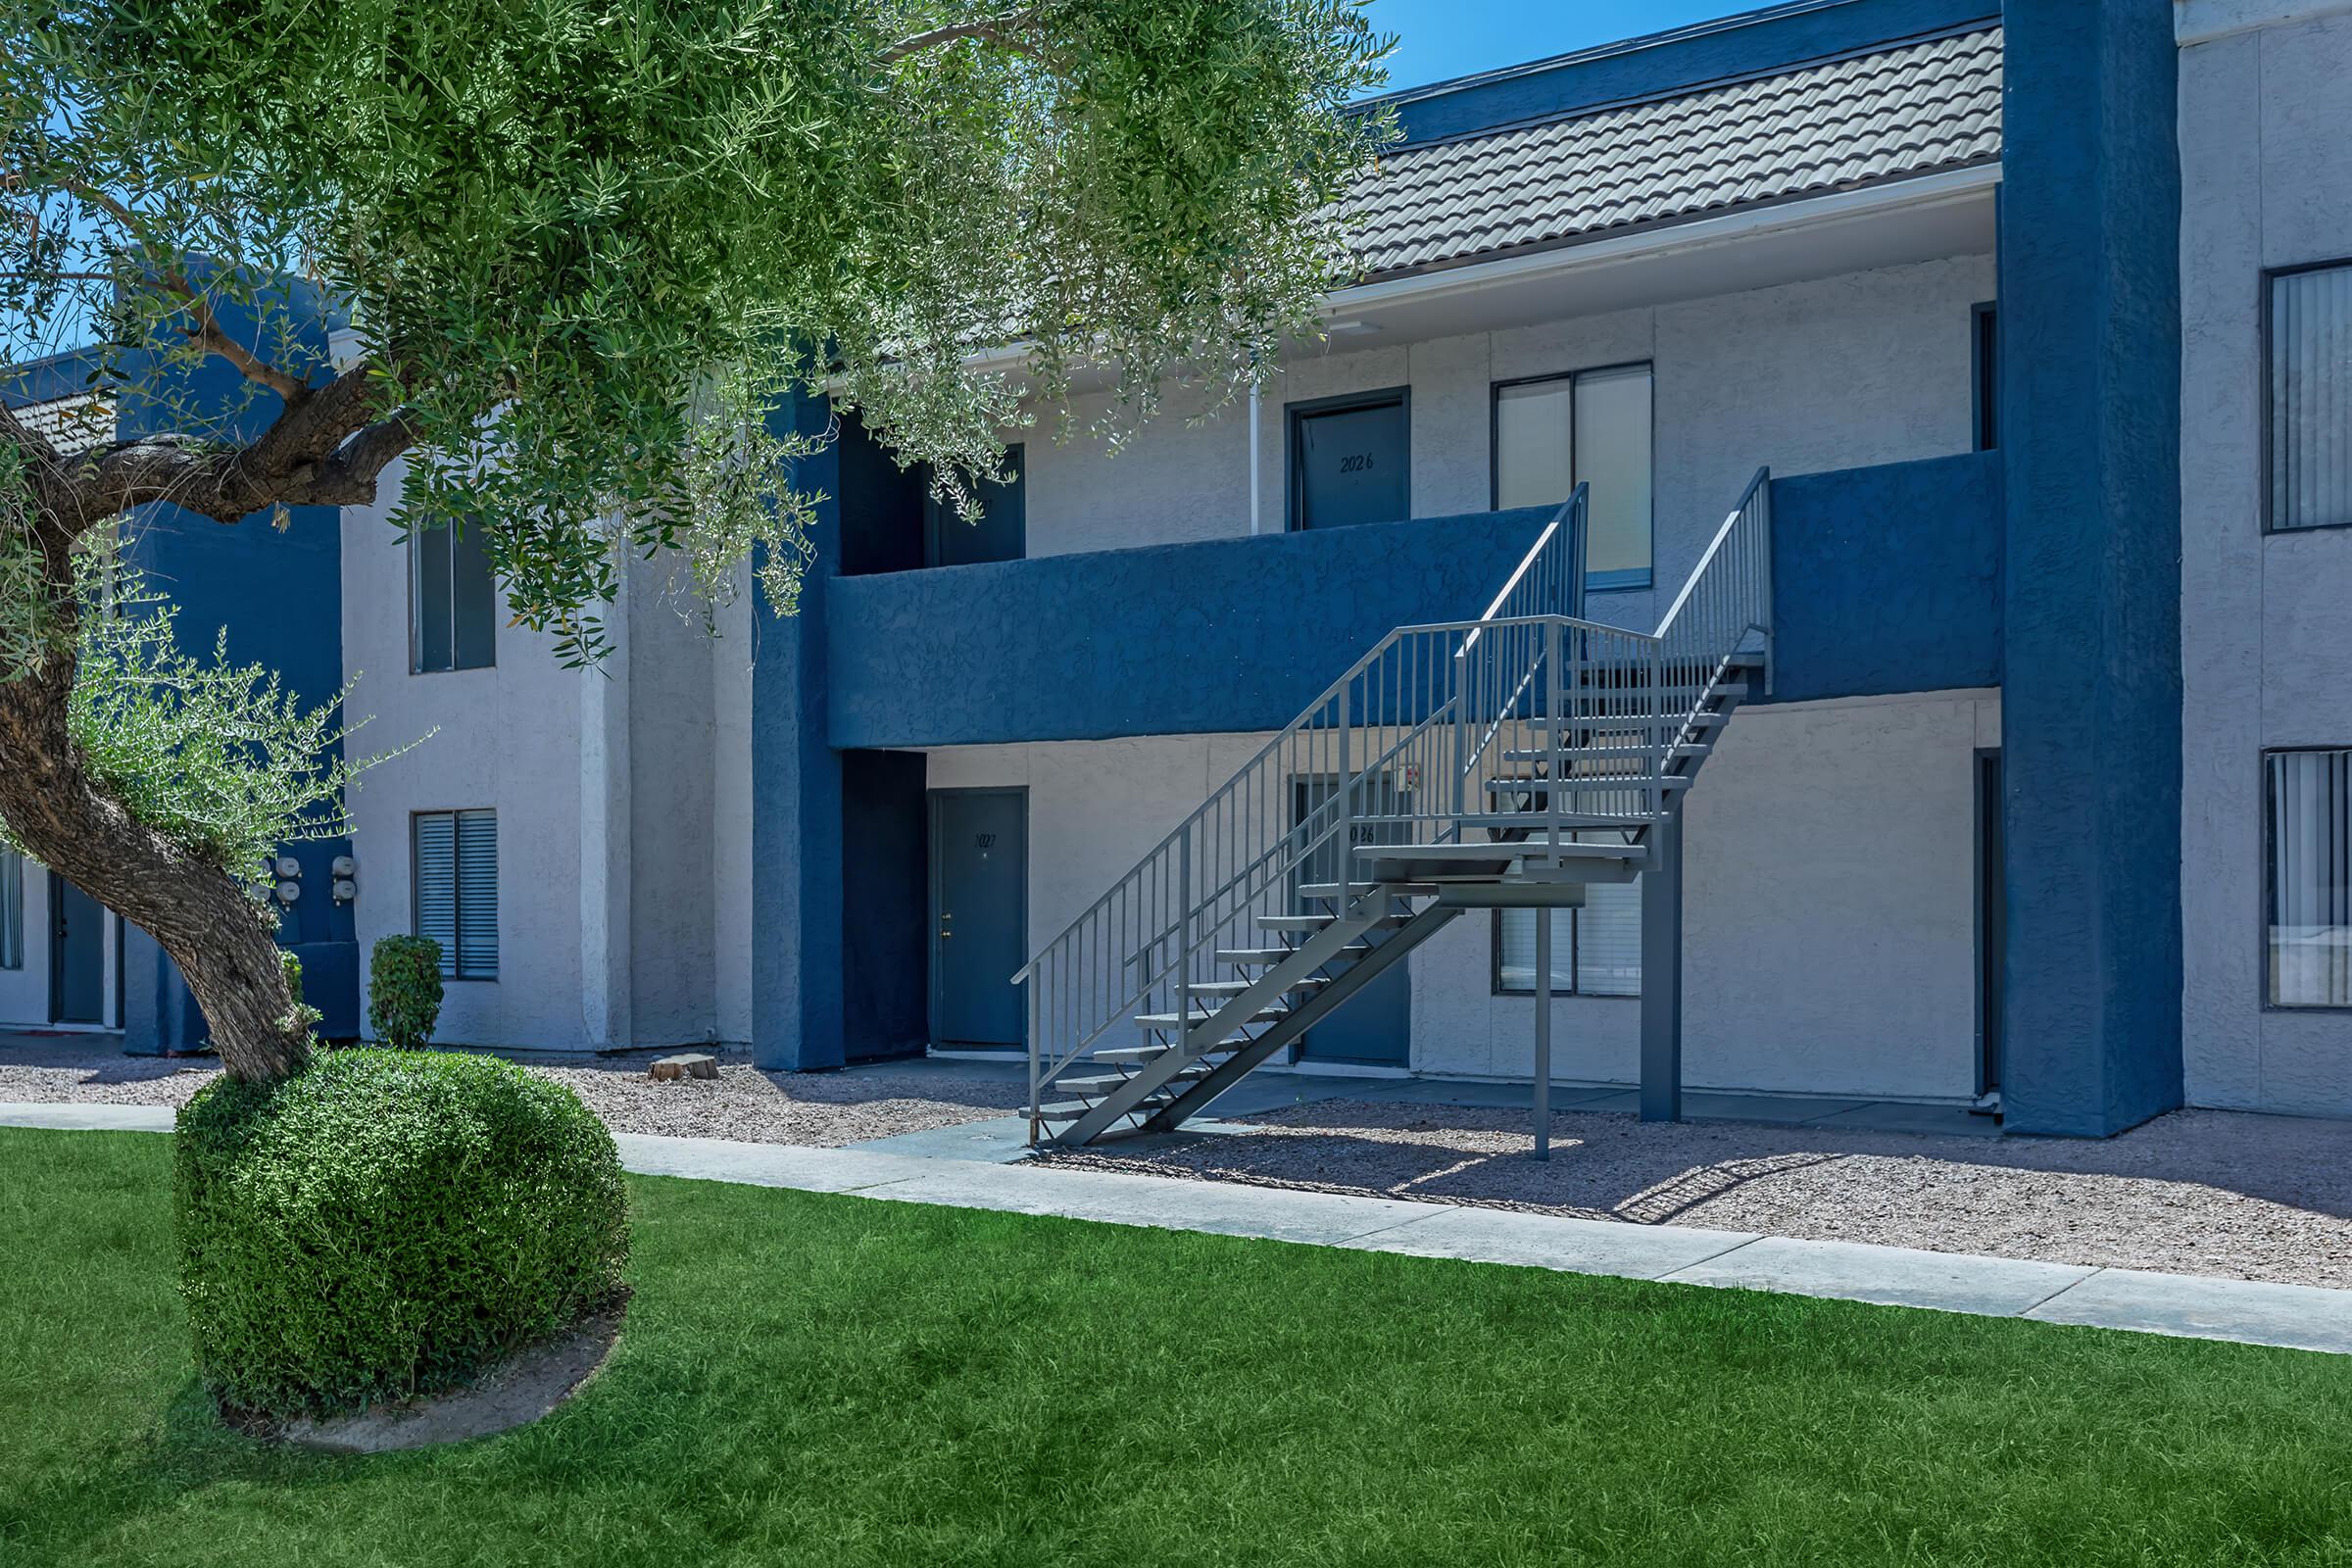 Blue and grey exterior apartment building tucked behind grass and sidewalk walkway